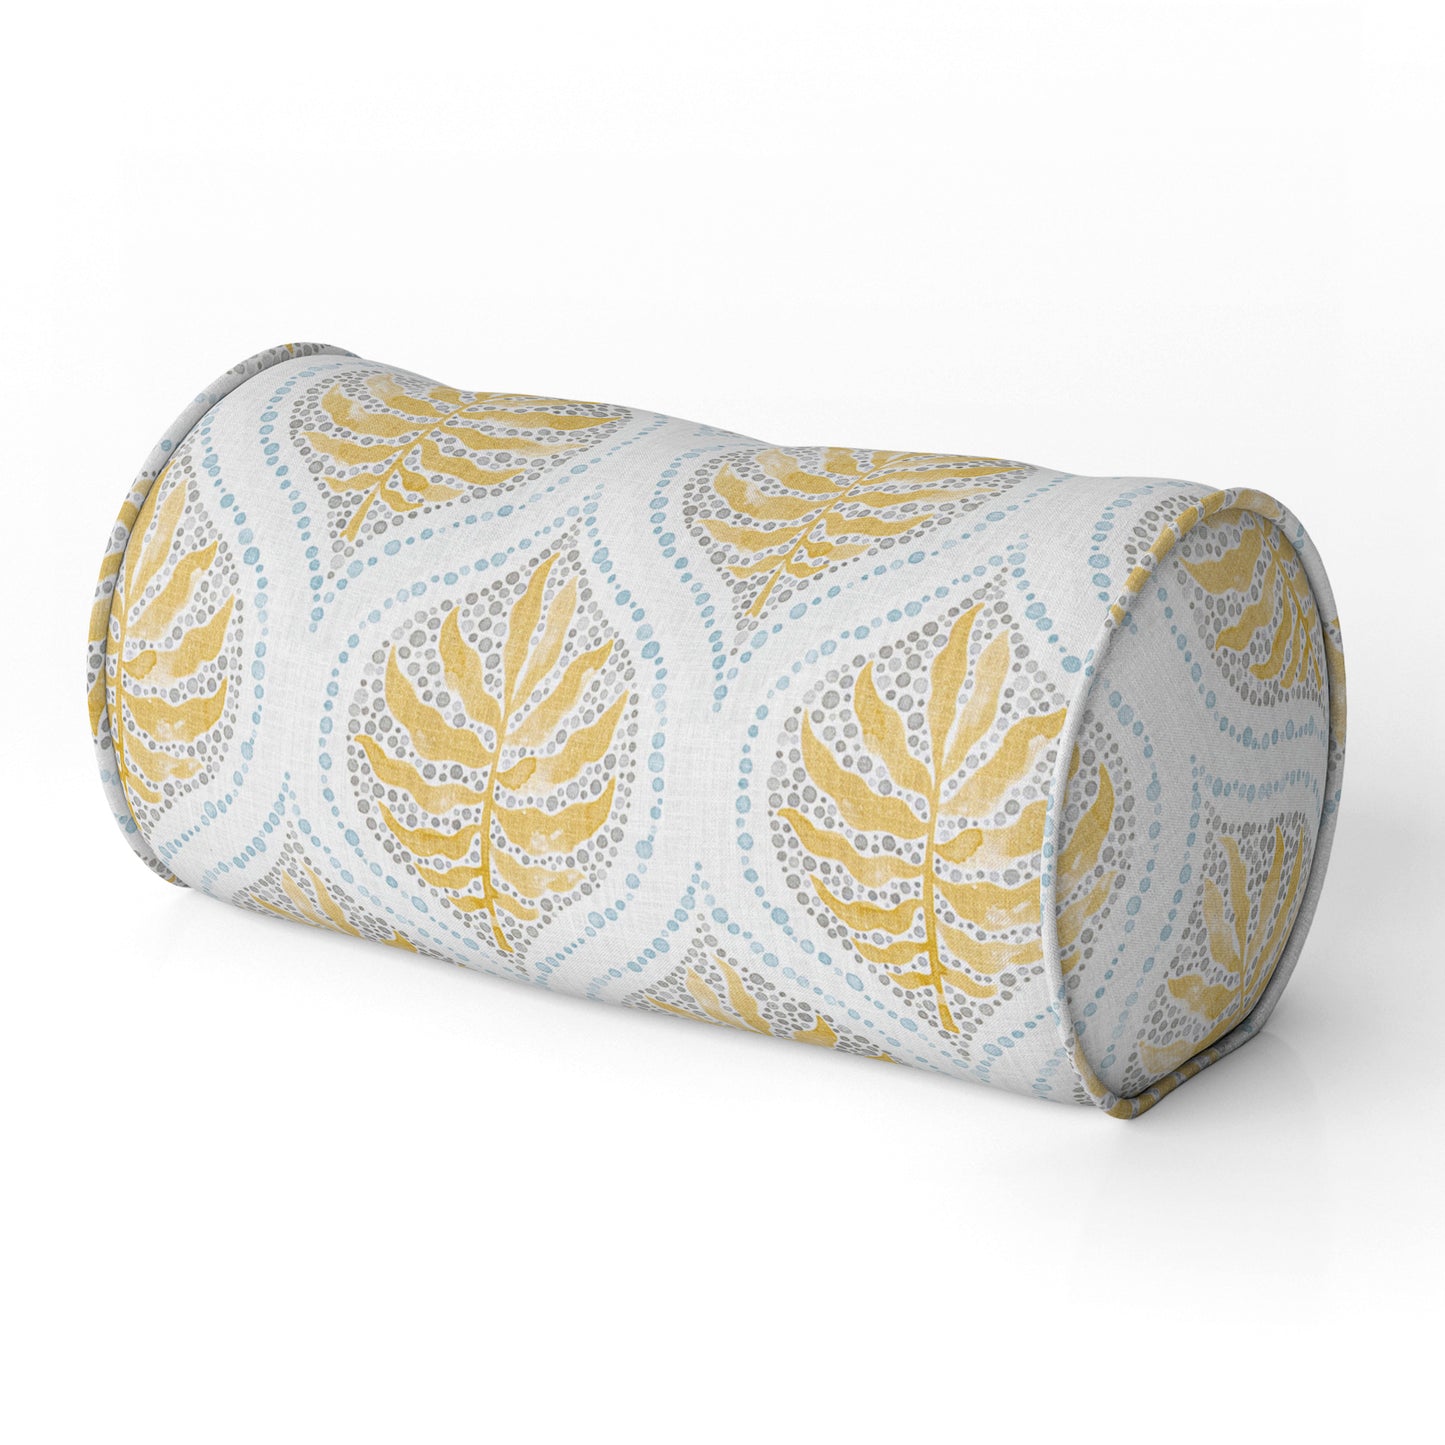 Decorative Pillows in Airlie Amber Ogee Floral Watercolor- Gold, Gray, Blue